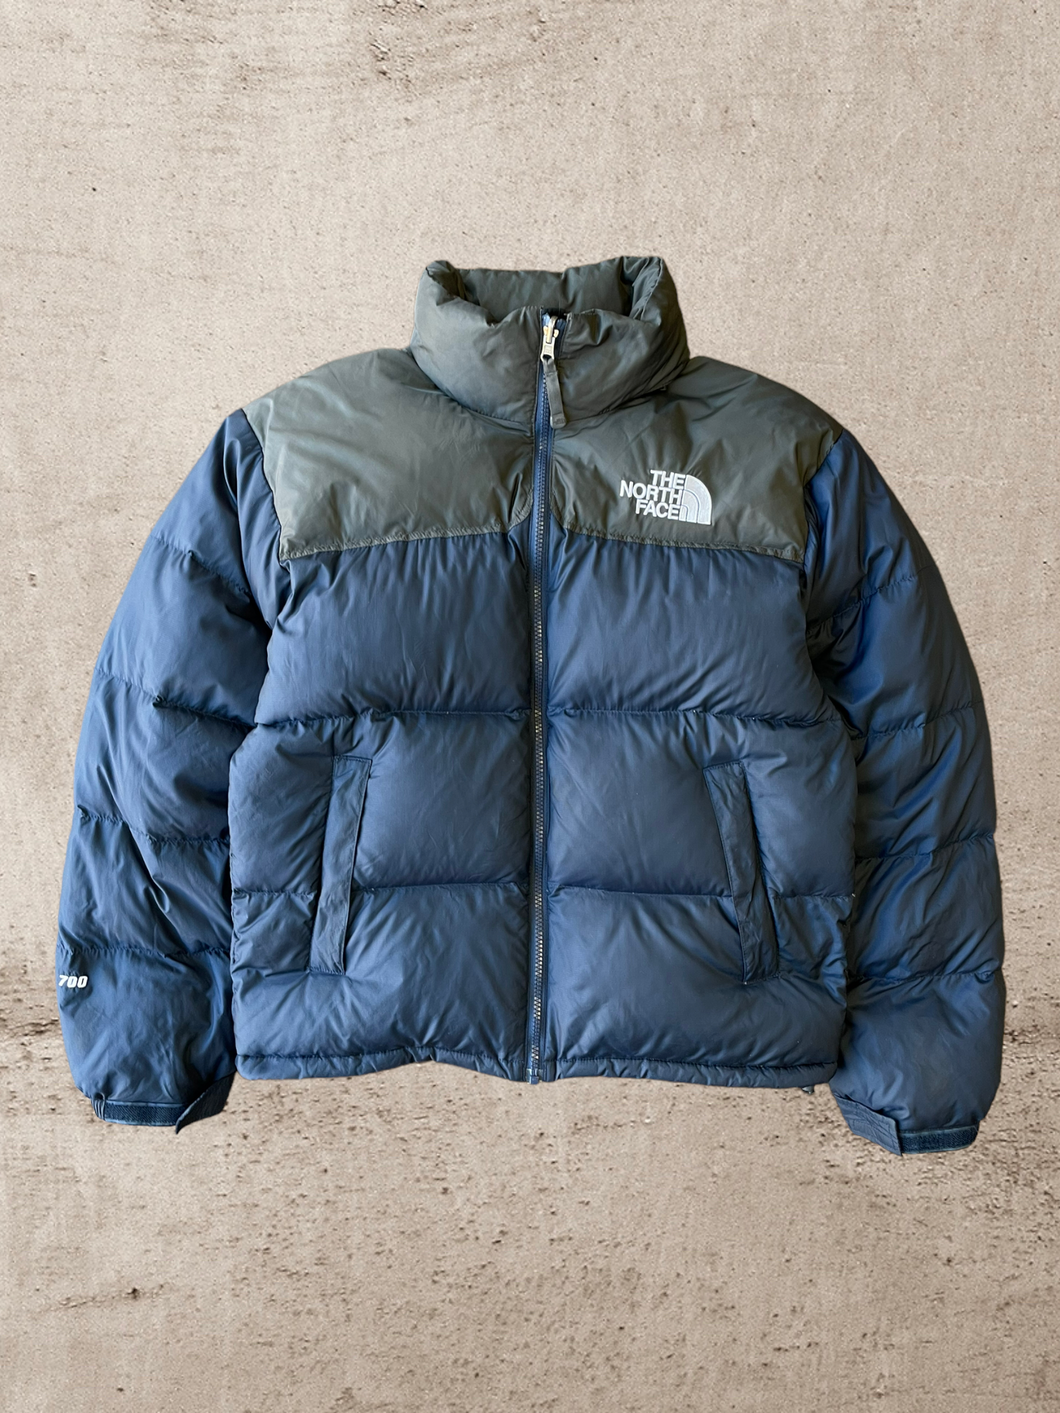 The North Face 700 Puffer Jacket - Small